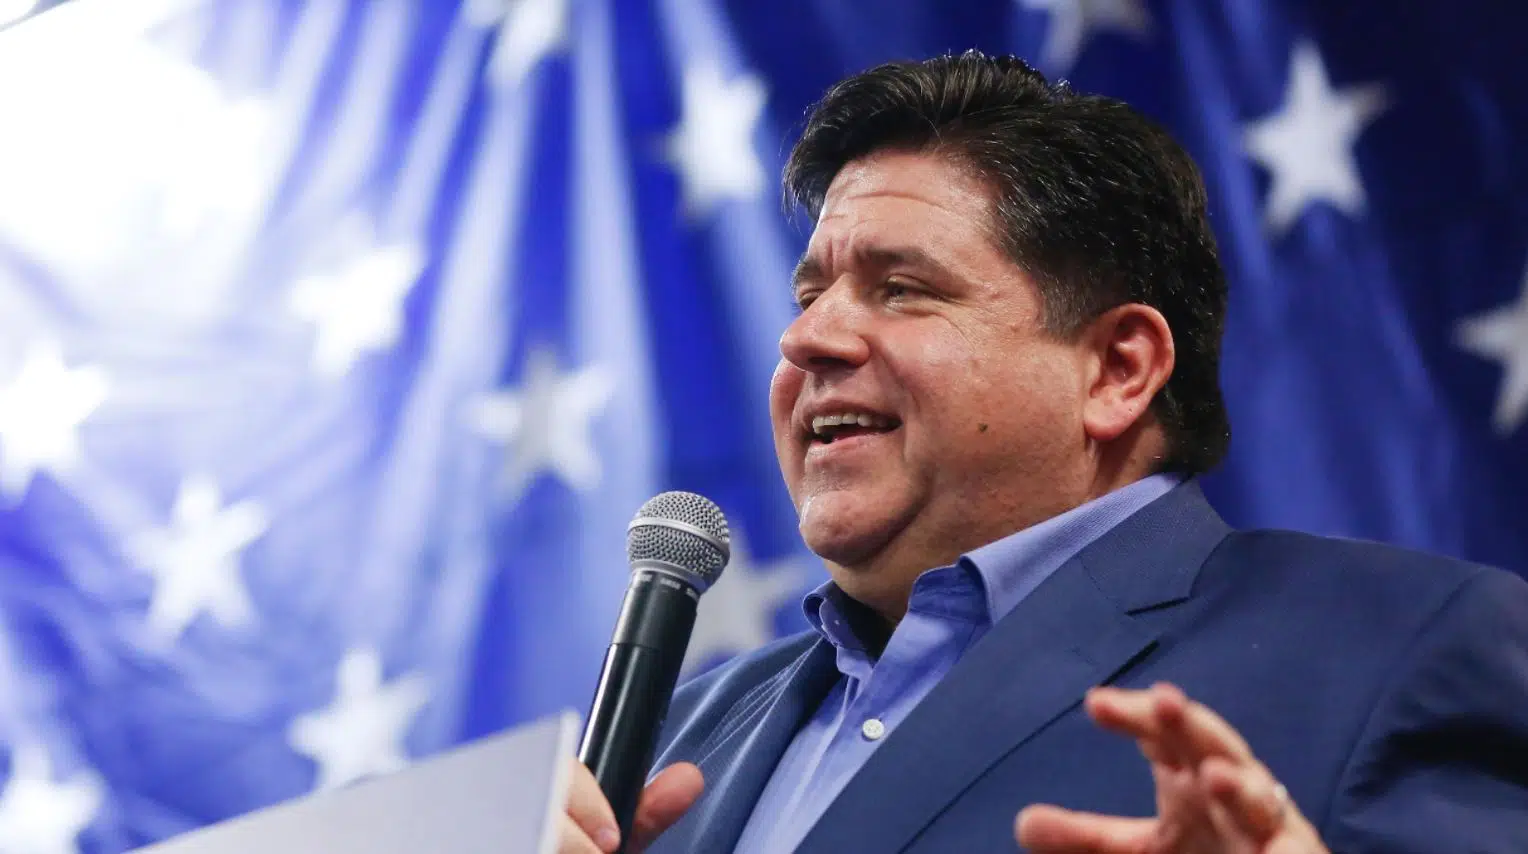 Pritzker: Illinois a ‘Force for Good’ by Cutting Carbon Gas